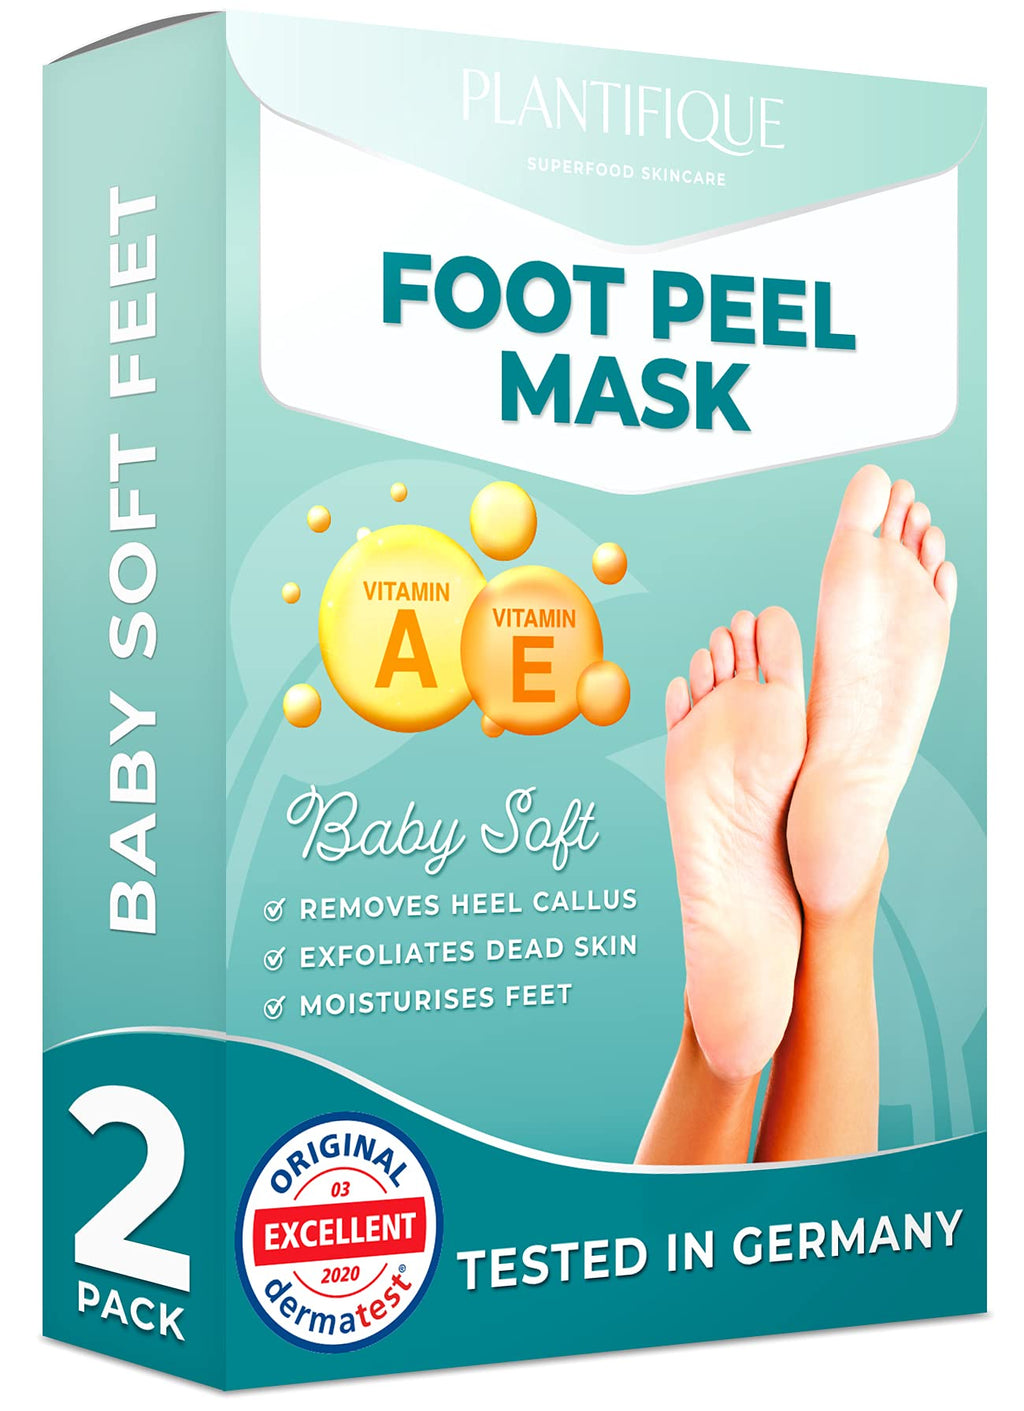 [Australia] - Foot Peel Mask - Vitamins Feet Peeling Mask 2 Pack - Dermatologically Tested, Cracked Heel Repair, Dead Skin Remover for Baby Soft Feet - Exfoliating Peel Natural Treatment by Plantifique 